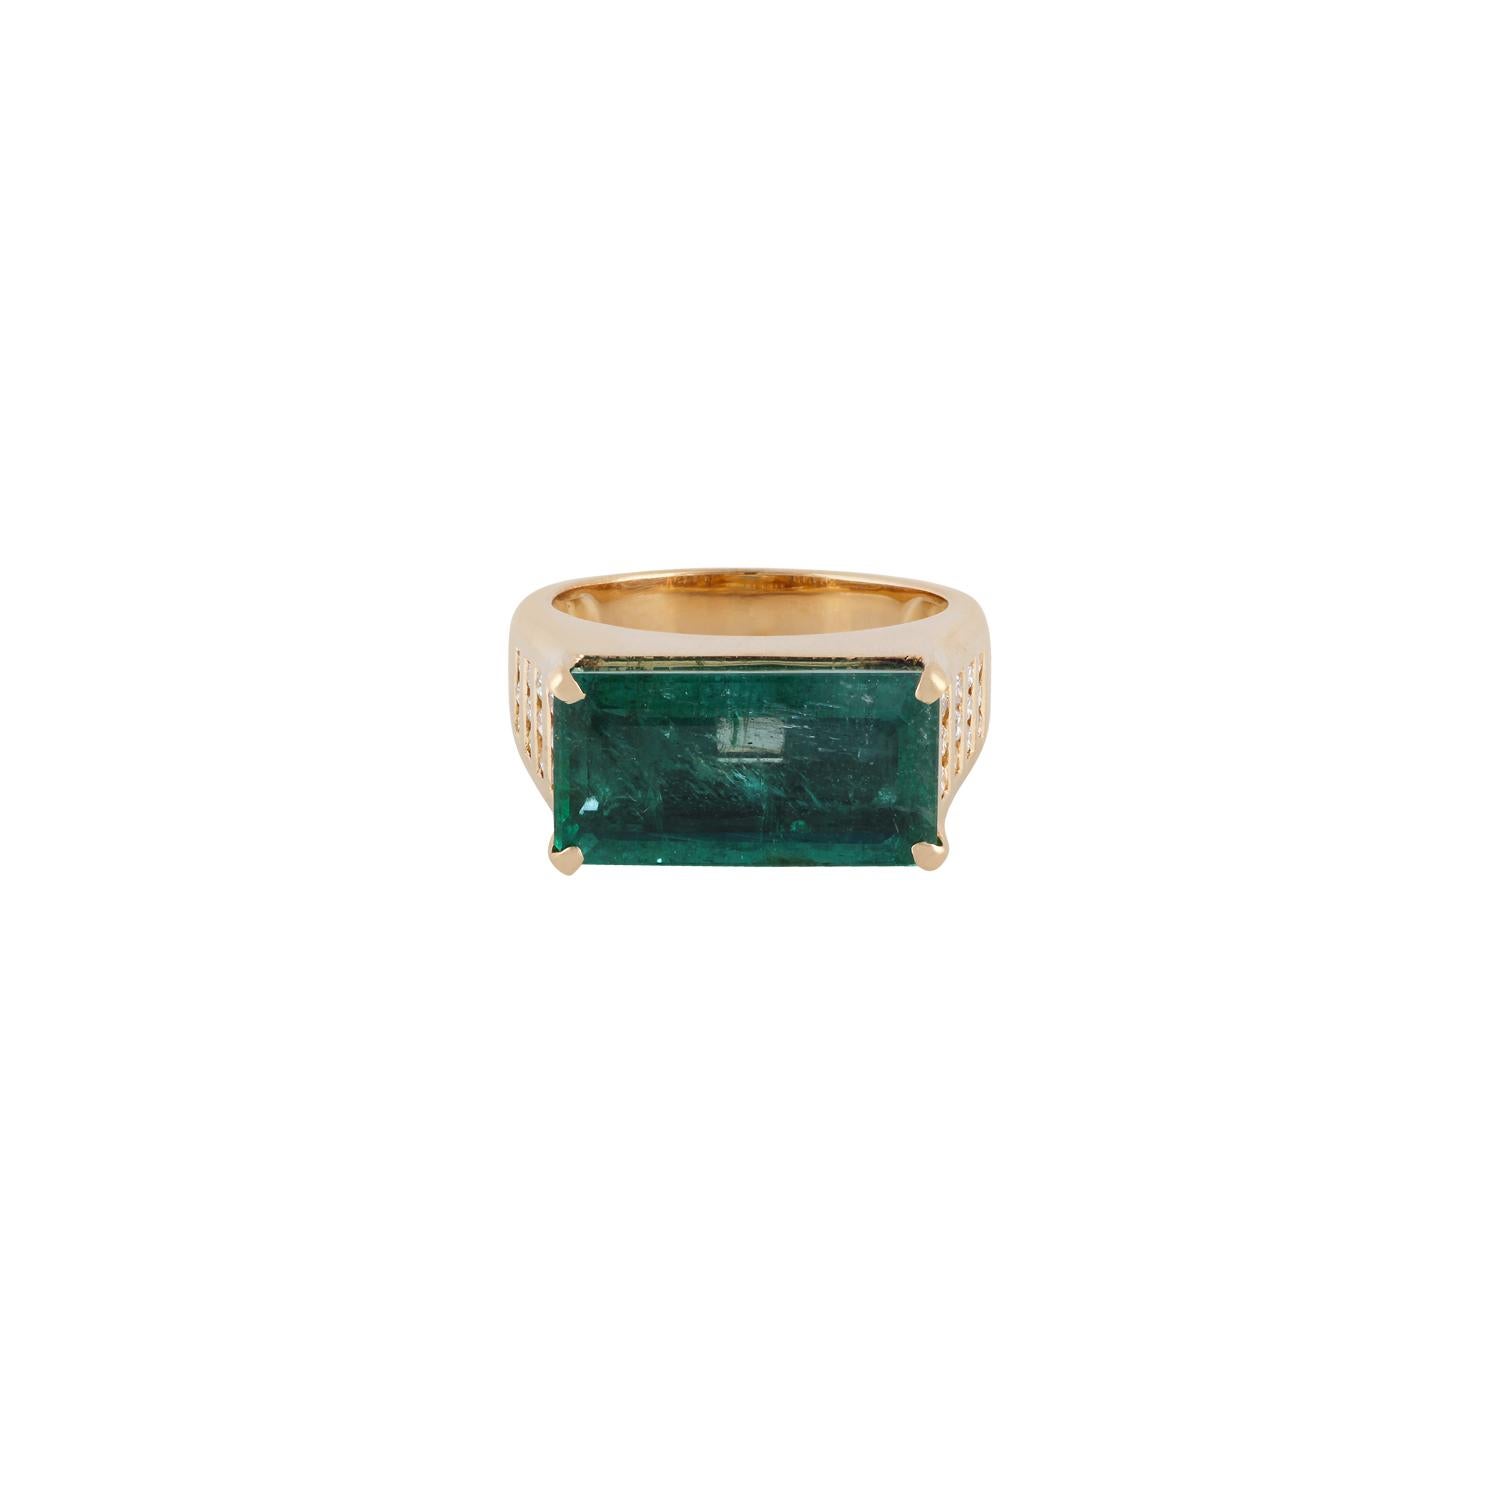 This is an elegant emerald & diamond ring studded in 18k Yellow gold with 1 piece of  Zambian emerald weight 6.57 carat which is surrounded by 24 pieces of diamonds weight 0.38 carat, this entire ring studded in 18k Yellow  gold.



 Ring size can